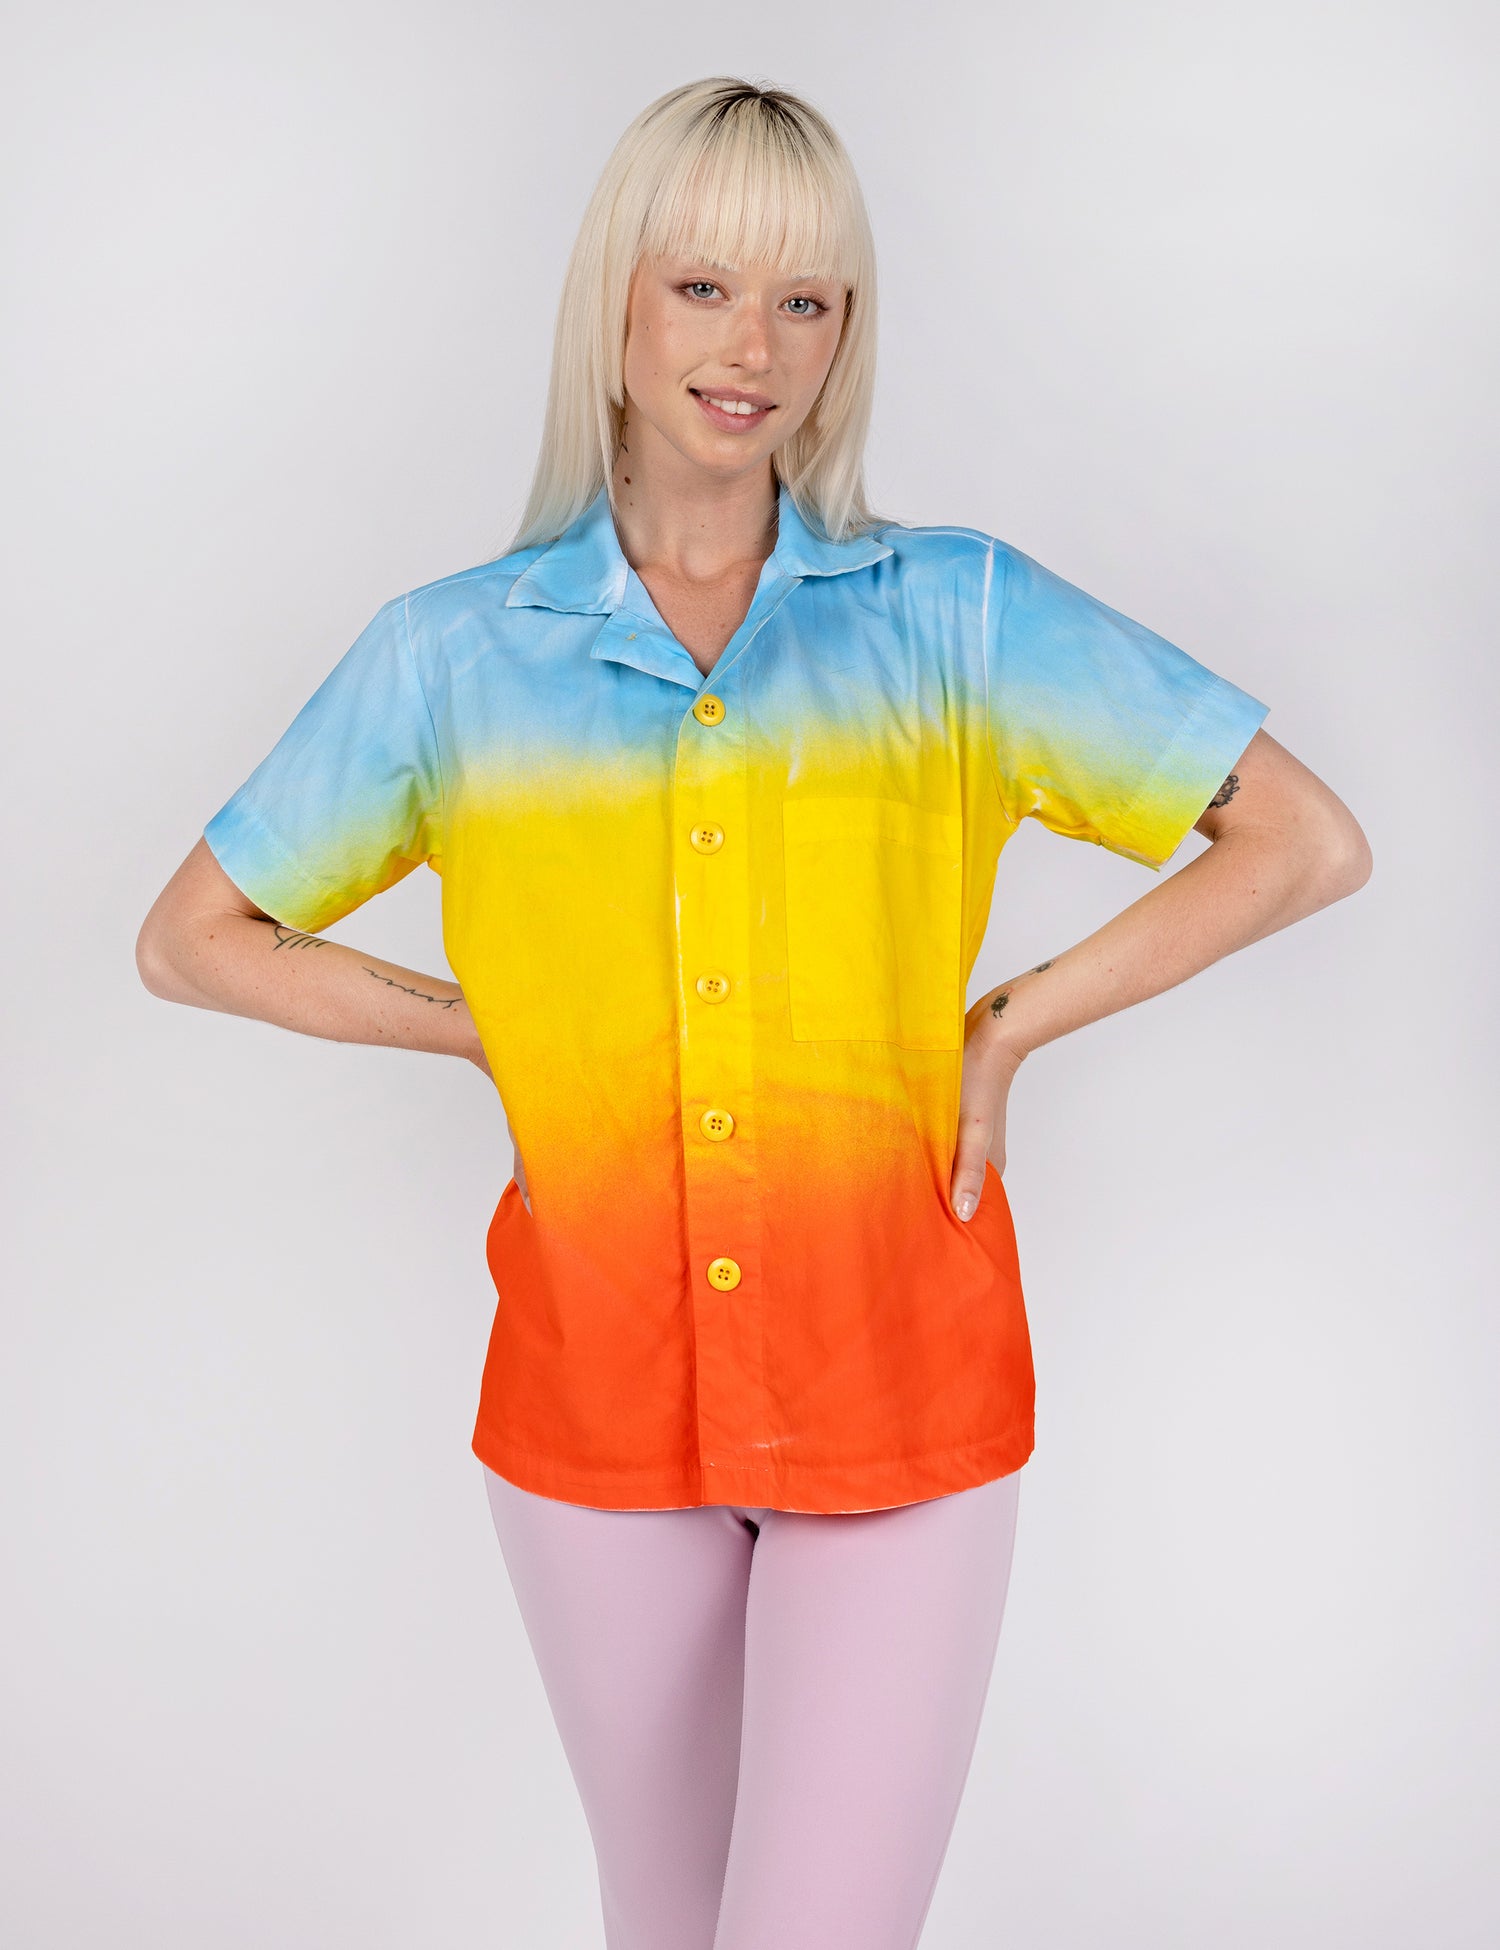 woman wearing a button down shirt in gradient designs of blue yellow and red orange